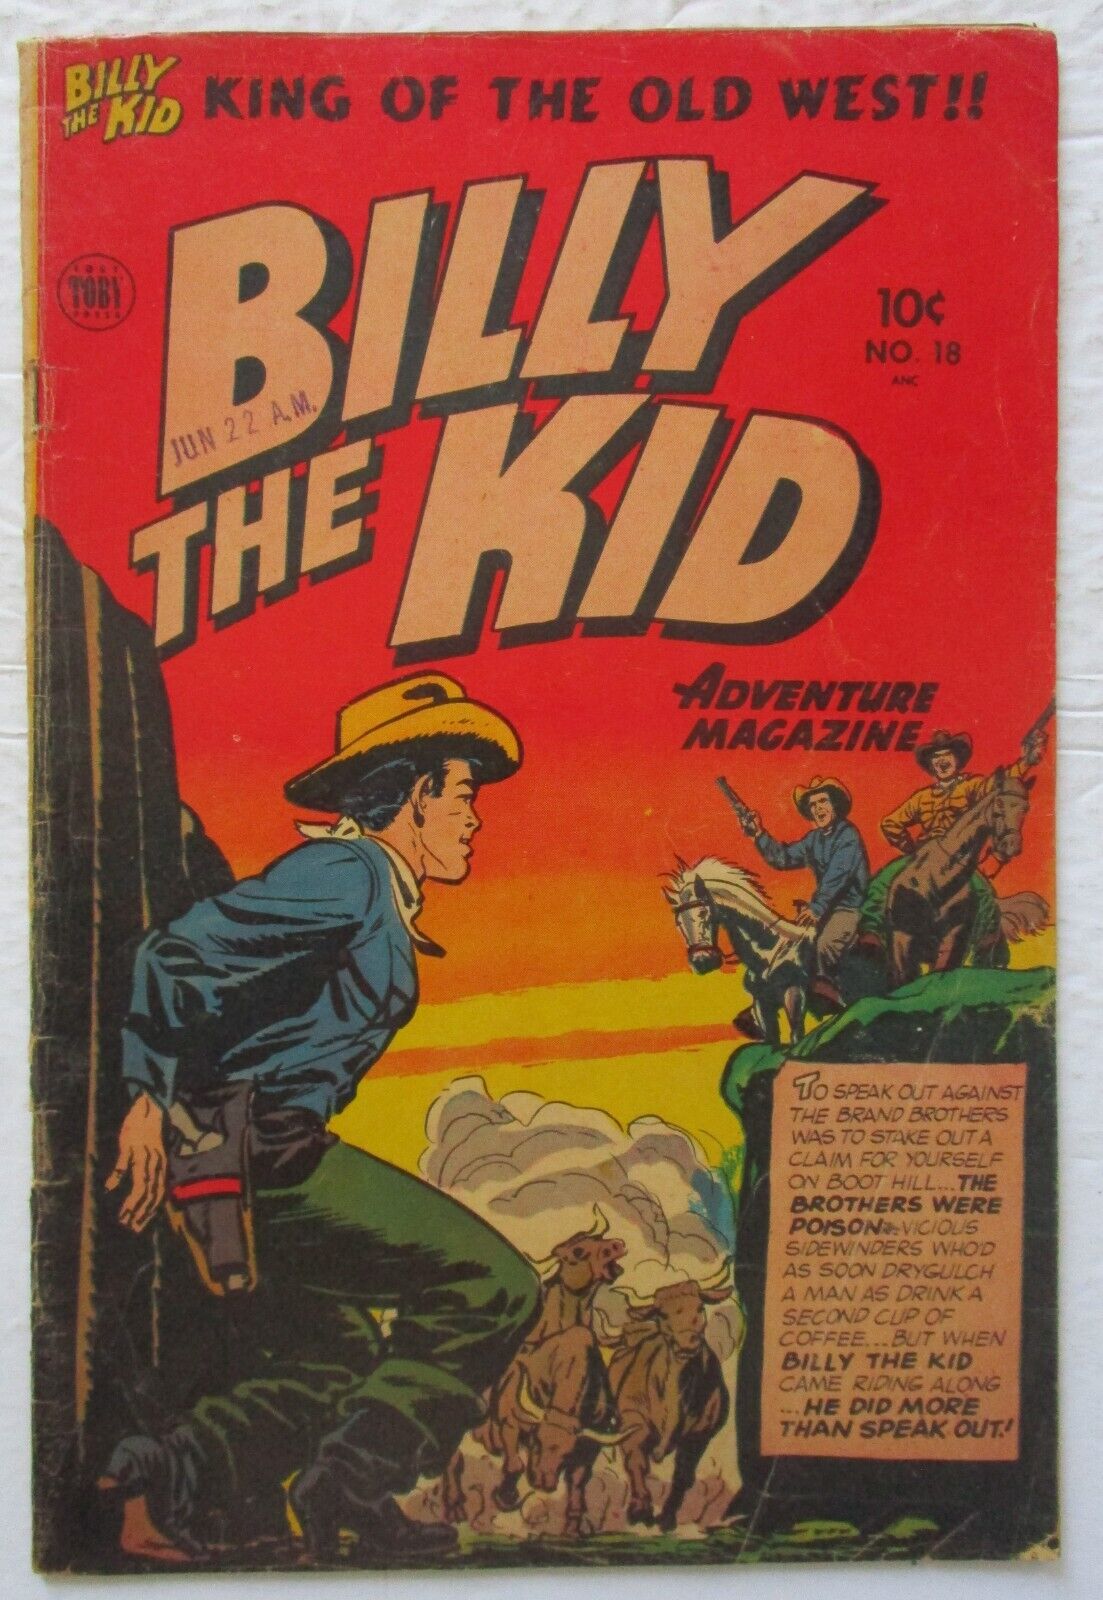 Billy The Kid Adventure Magazine #18 Golden Age Toby Press Comic Book 1953 VG-